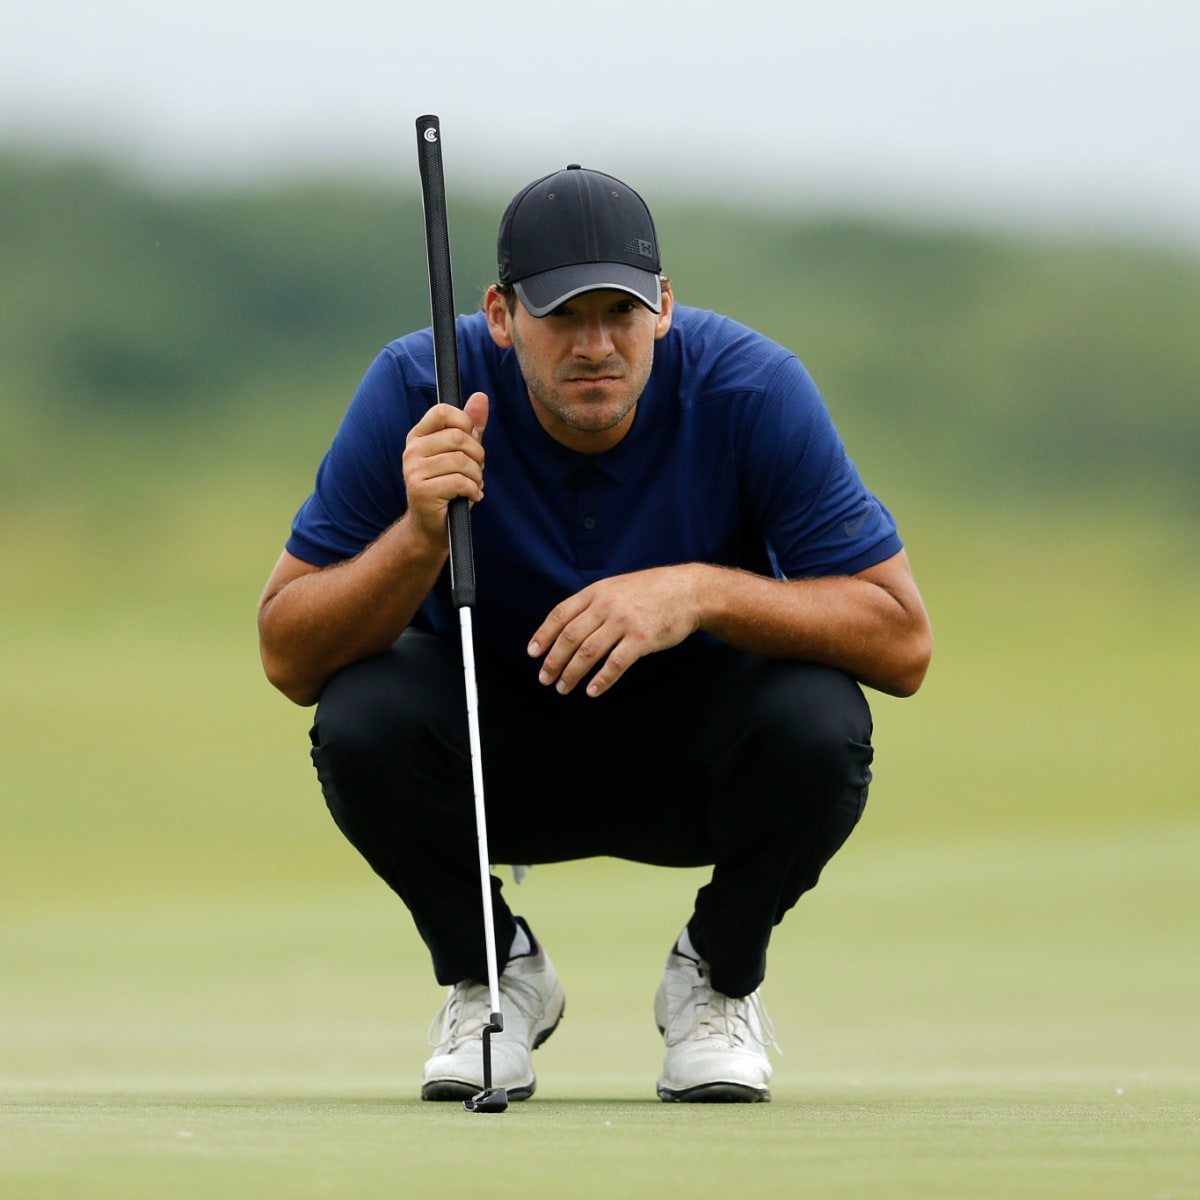 Tony Romo unlocks answers to puzzle that is his golf game; Burlington  native wins second straight American Century Championship by 10 points, Men's Professional